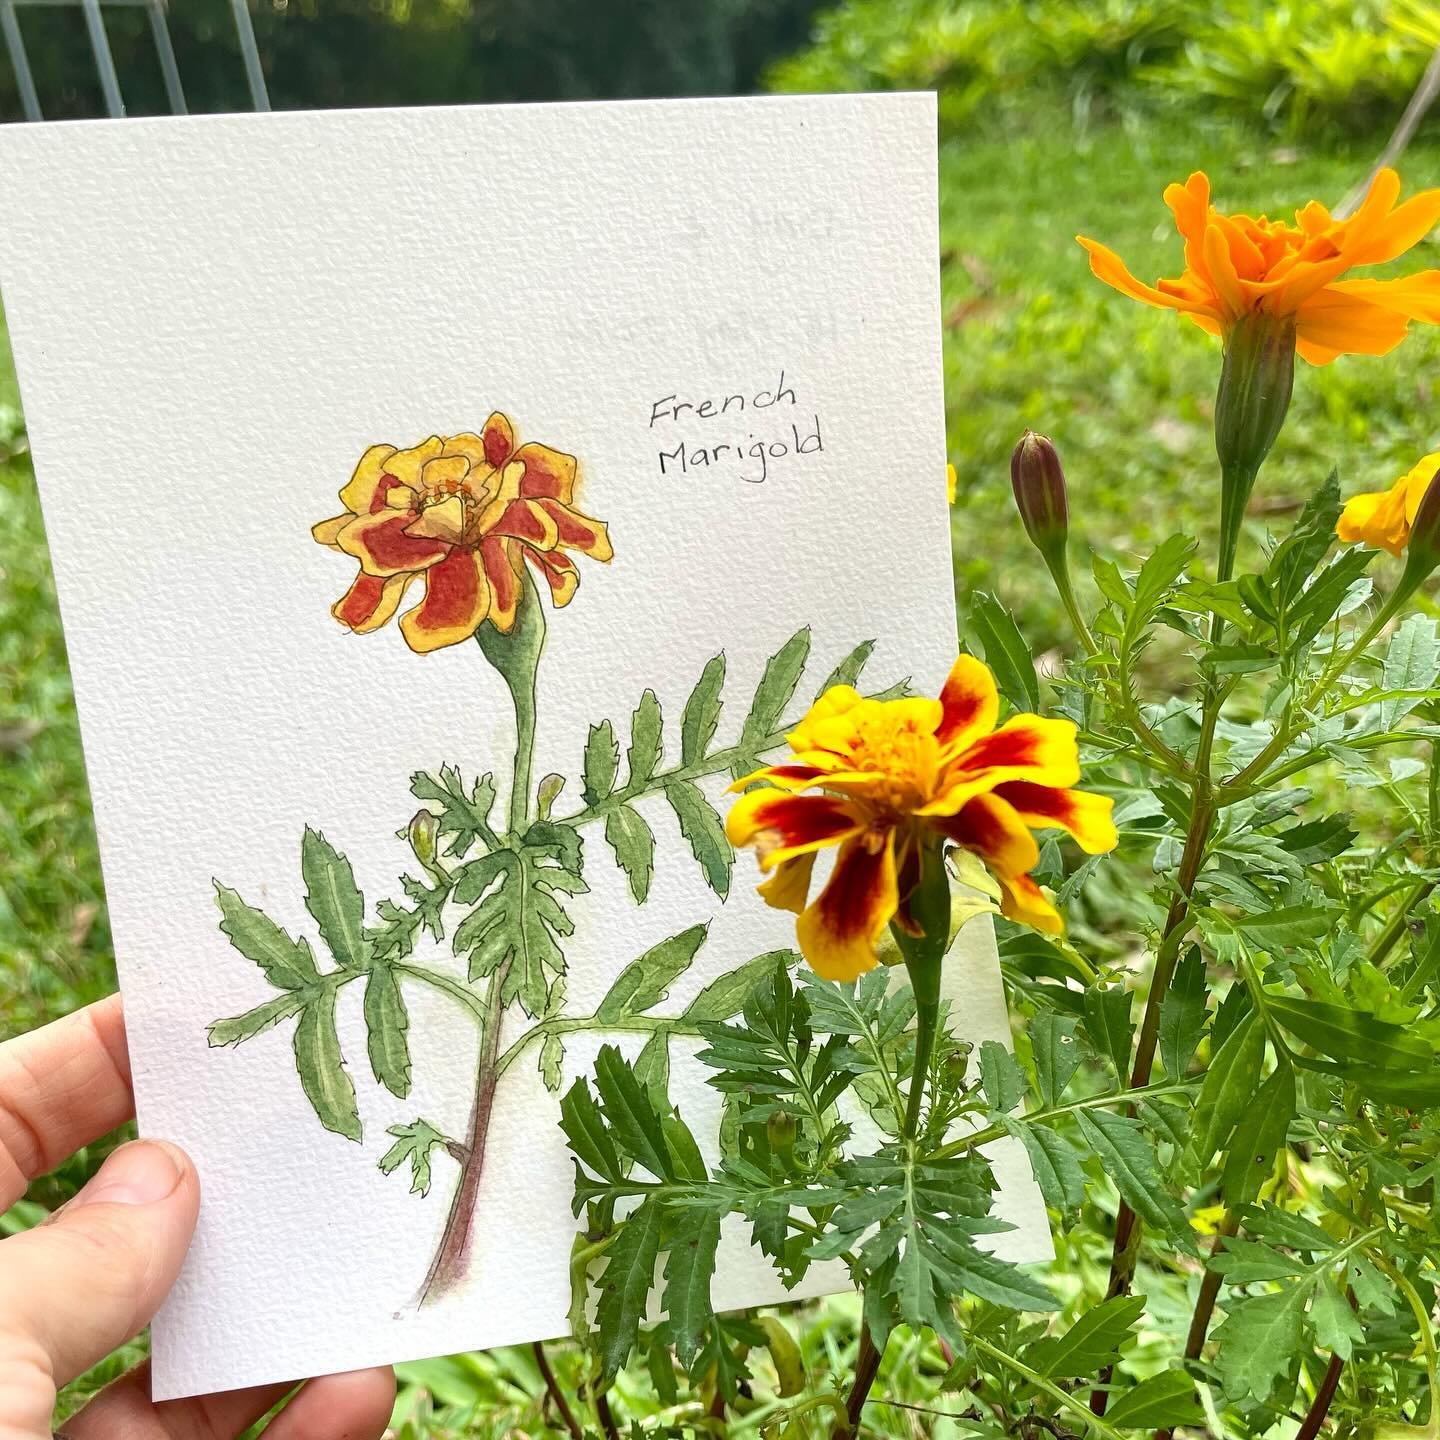 The next plant in this little garden series is marigold. I am enjoying making time for my art practice and my garden even while things start getting really busy, as they always do at this time of year in the lead up to #naturejournalingweek. This Sat